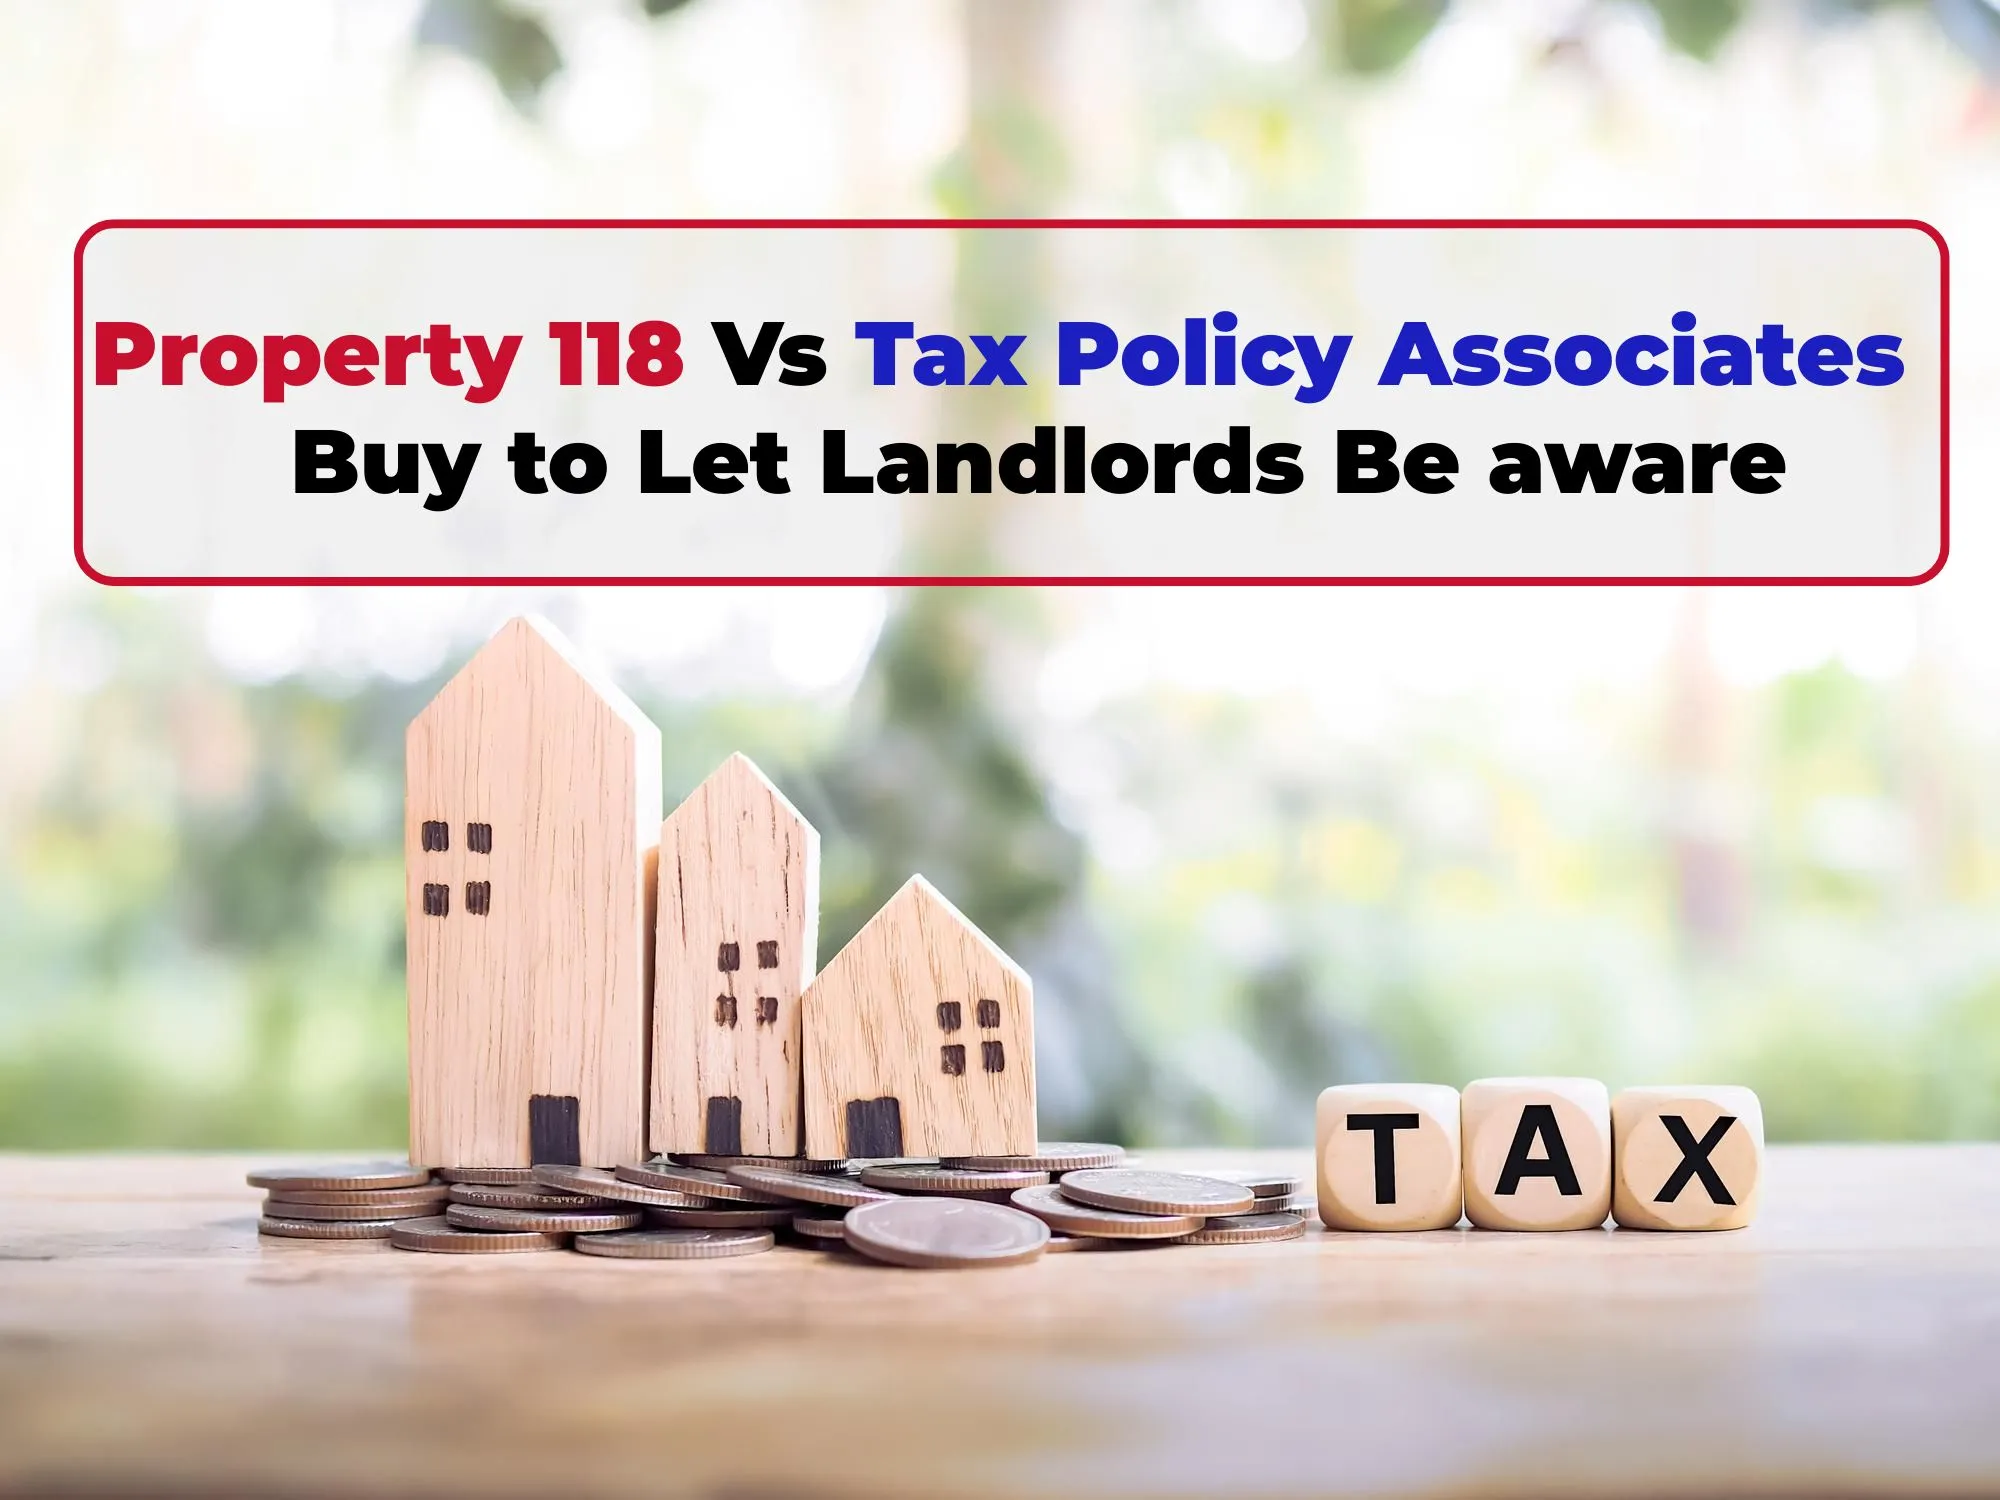 Property 118 vs Tax Policy Associates- Buy to Let Landlords Be aware